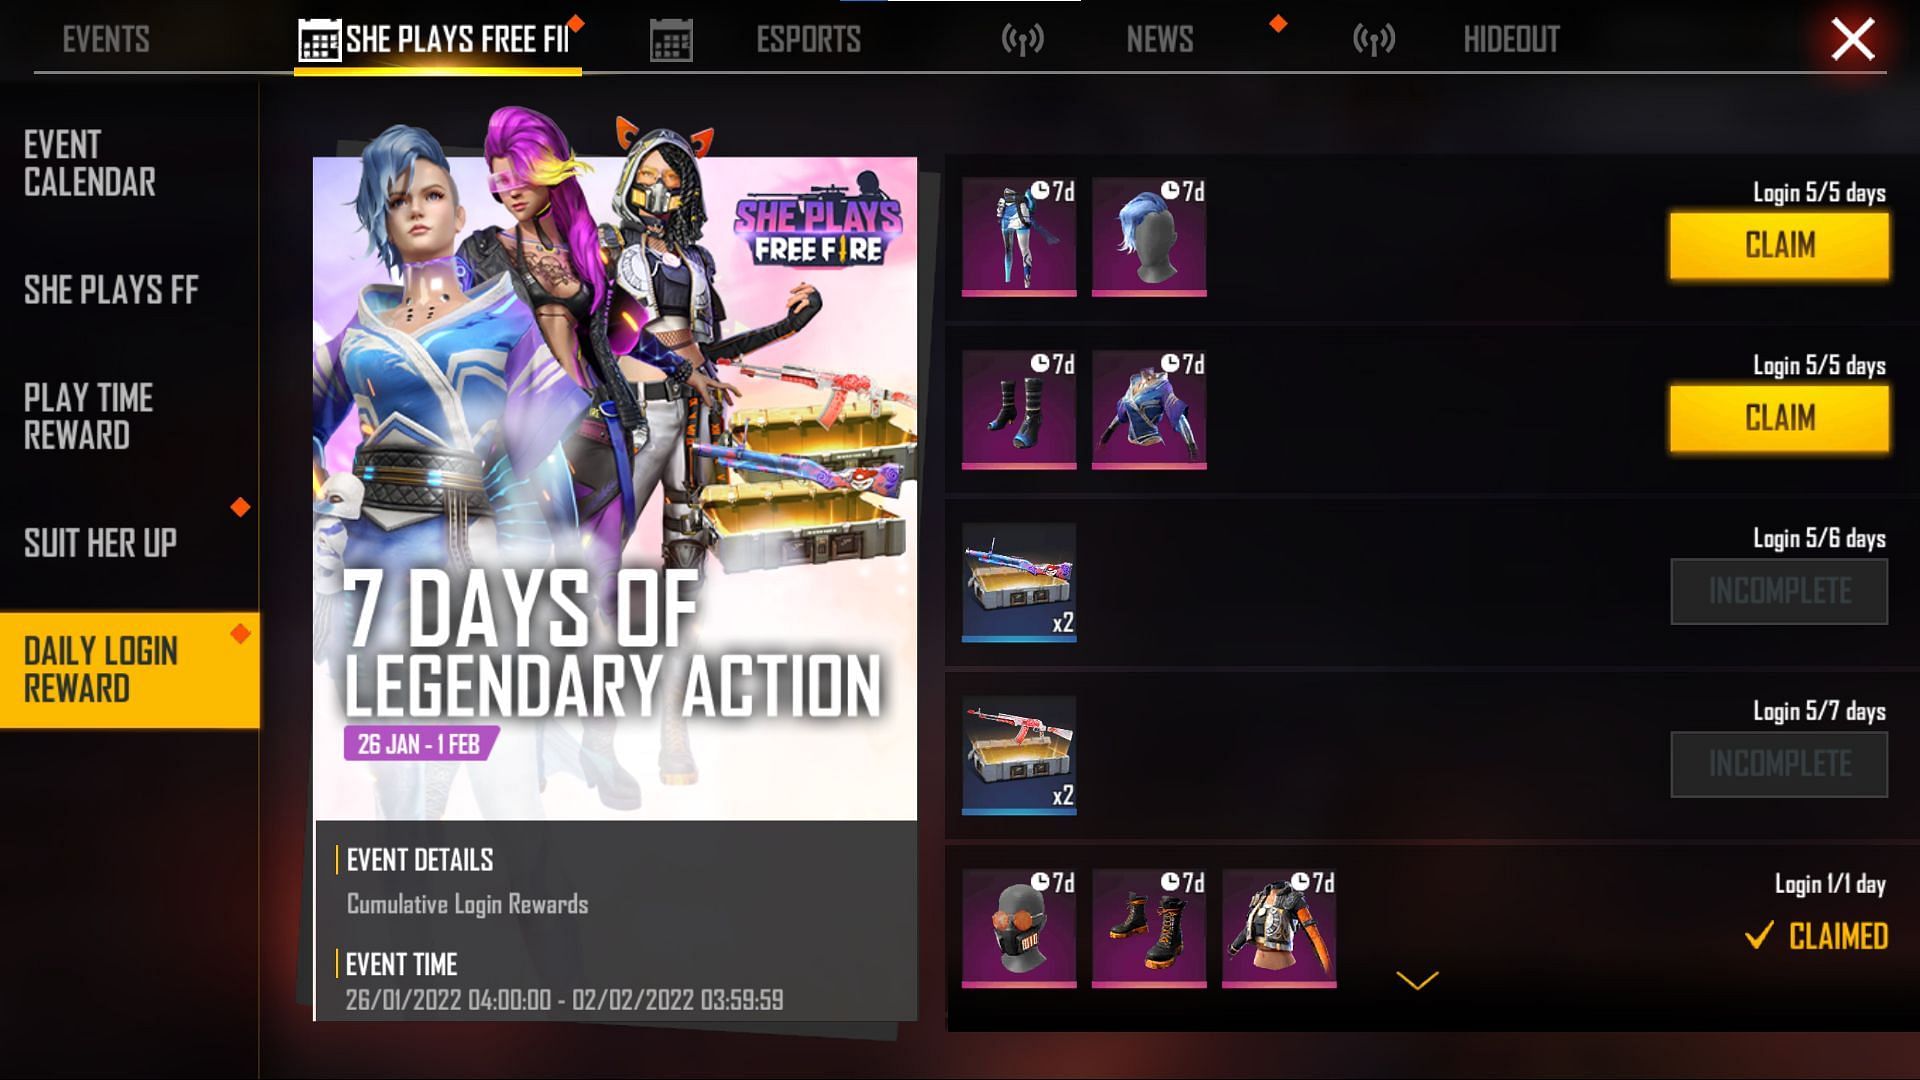 The bundle can be claimed through this event (Image via Garena)